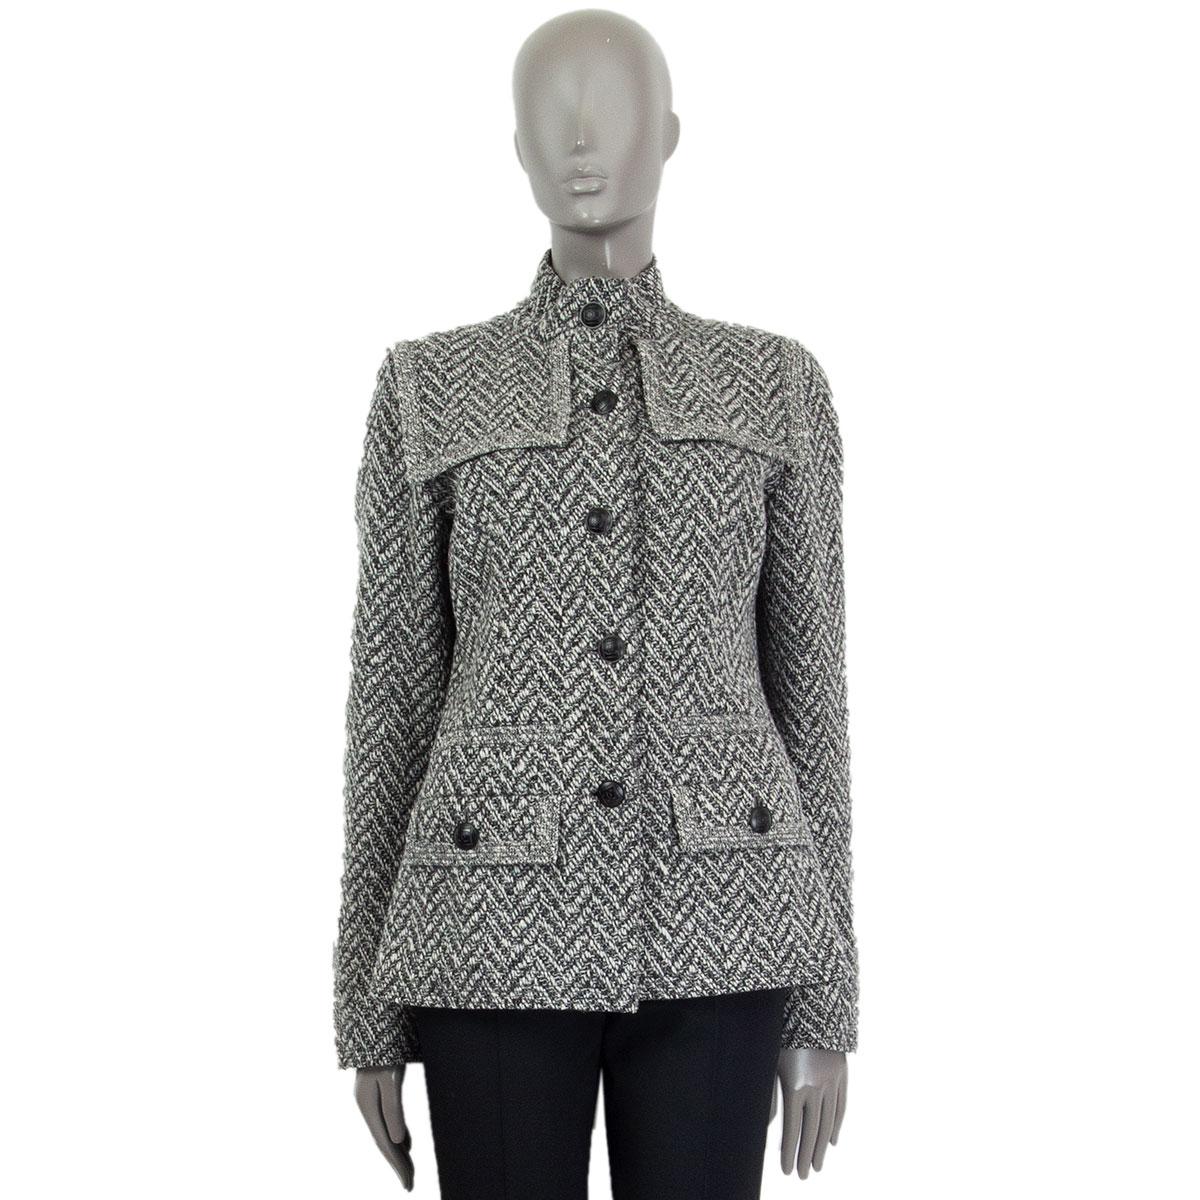 100% authentic Chanel knitted Herringbone jacket in black, white and light grey wool (90%) and nylon (10%). Features two flap pockets at front. Stand up collar. Opens with black matt CC embellished buttons and has zipped cuffs. Lined sleeves in